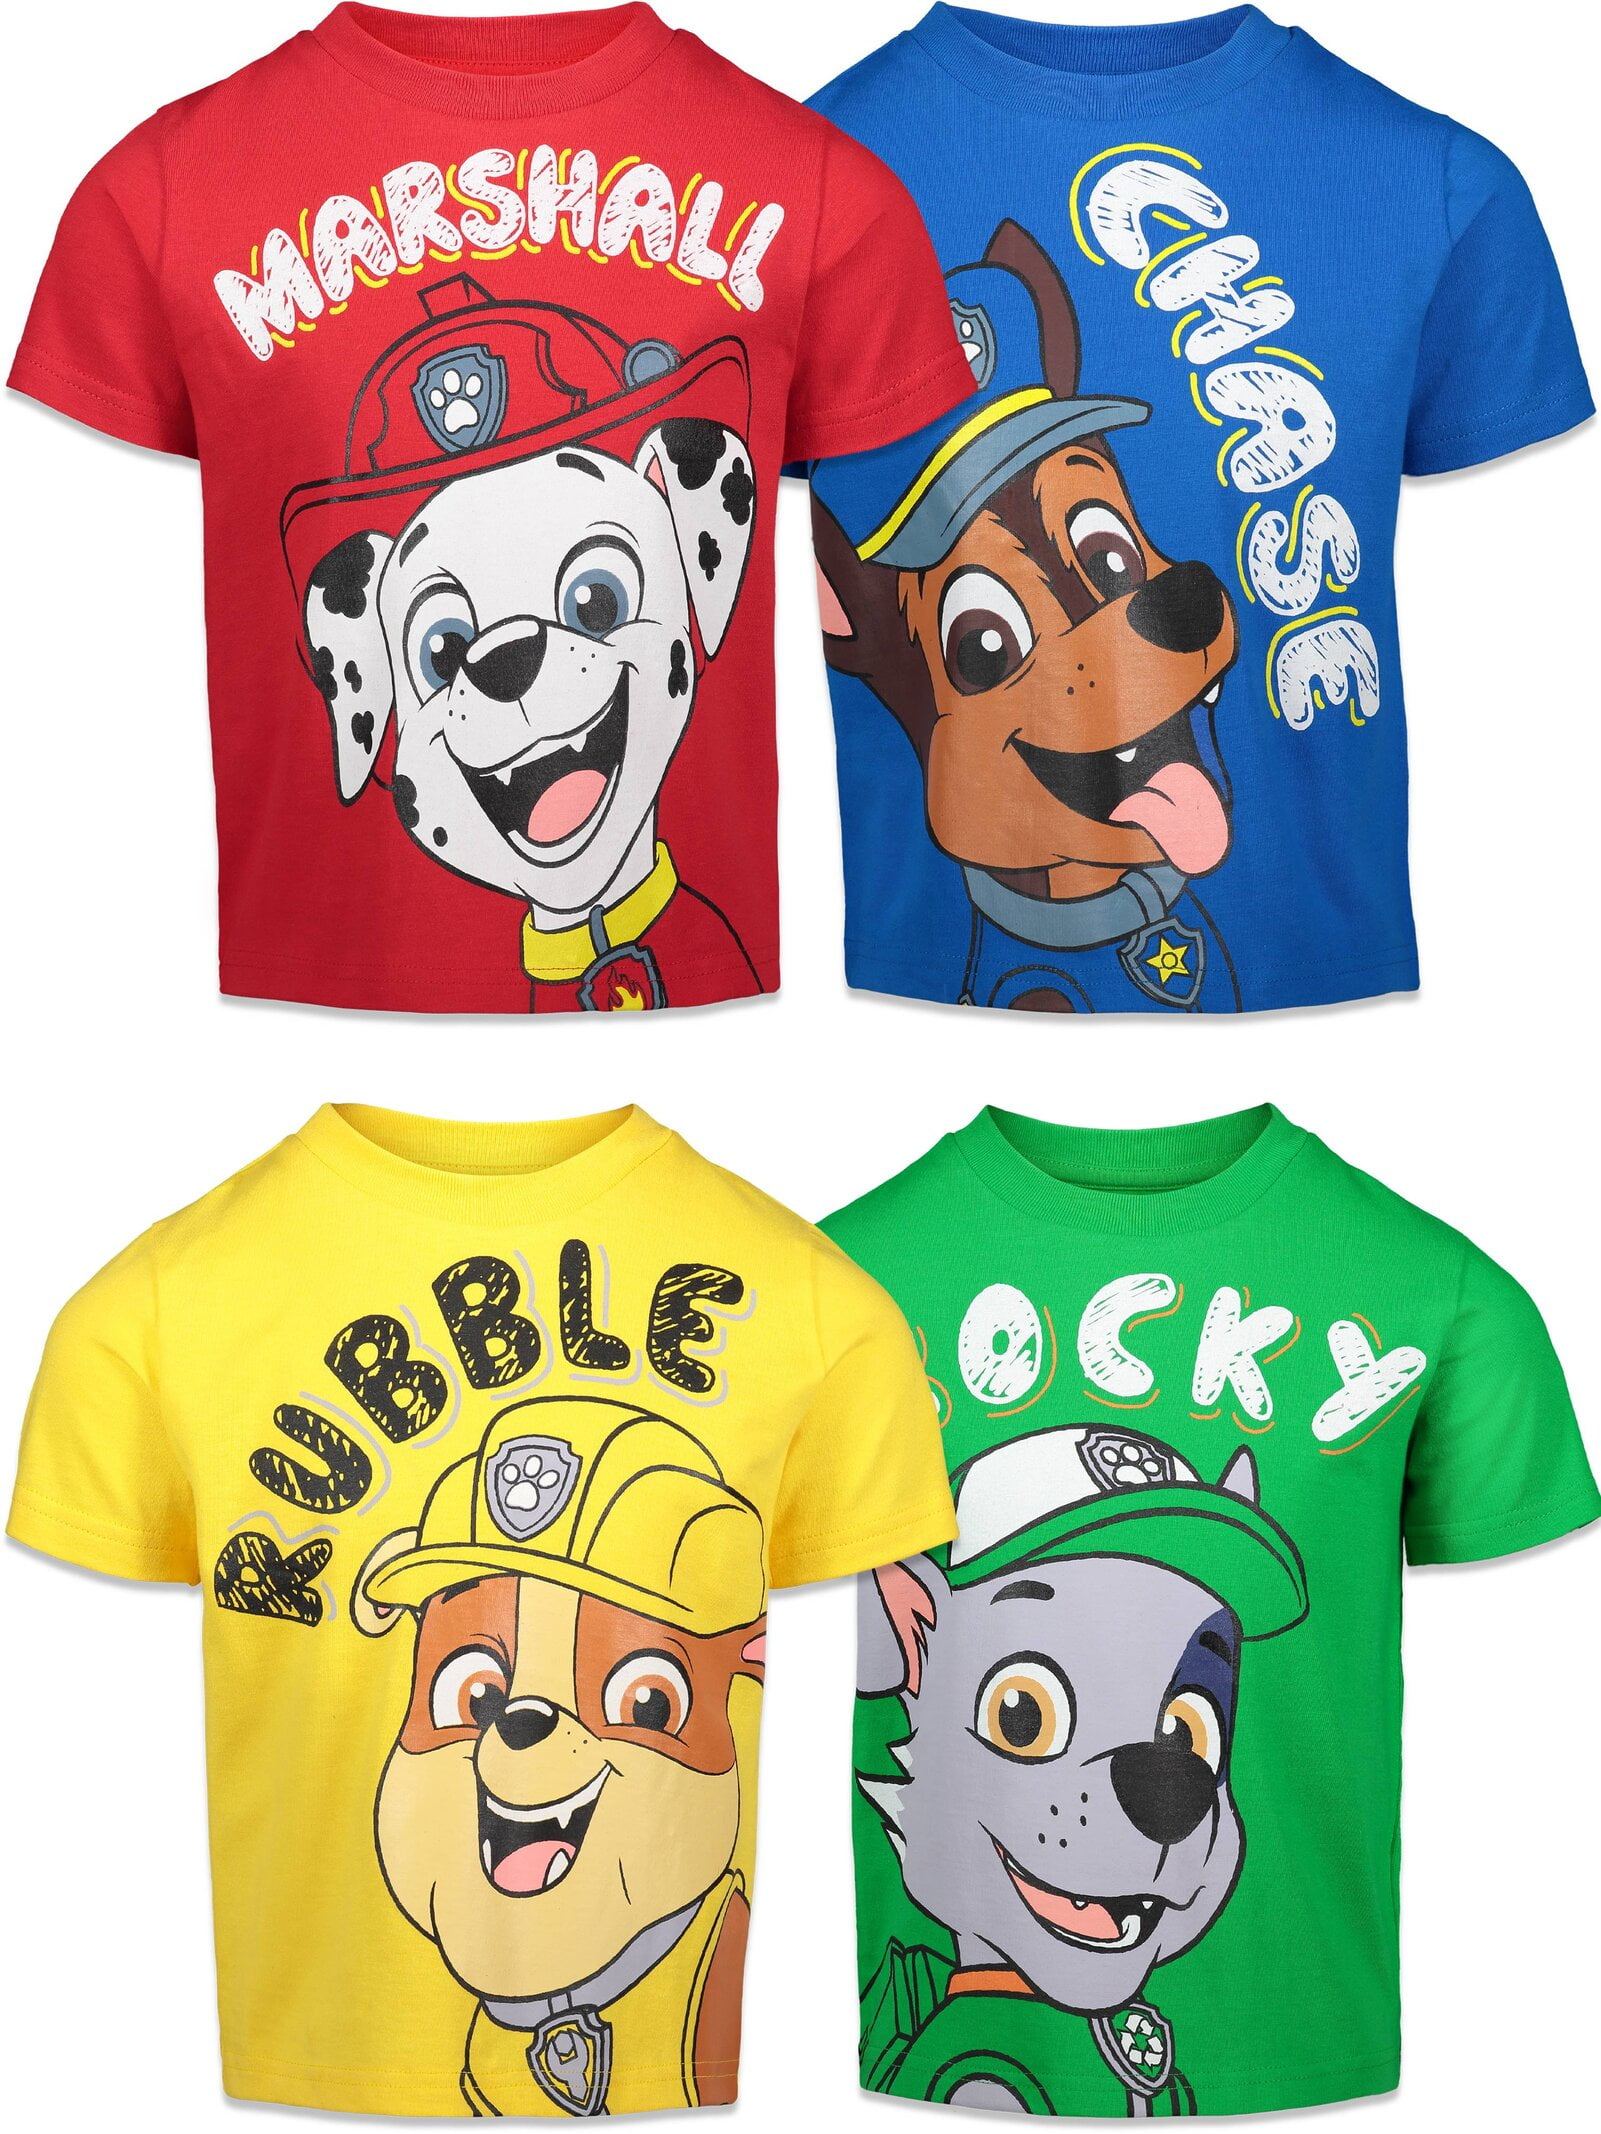 Marshall Pack 4 Patrol Rocky Chase Multicolor Paw Rubble T-Shirts Boys Toddler 2T